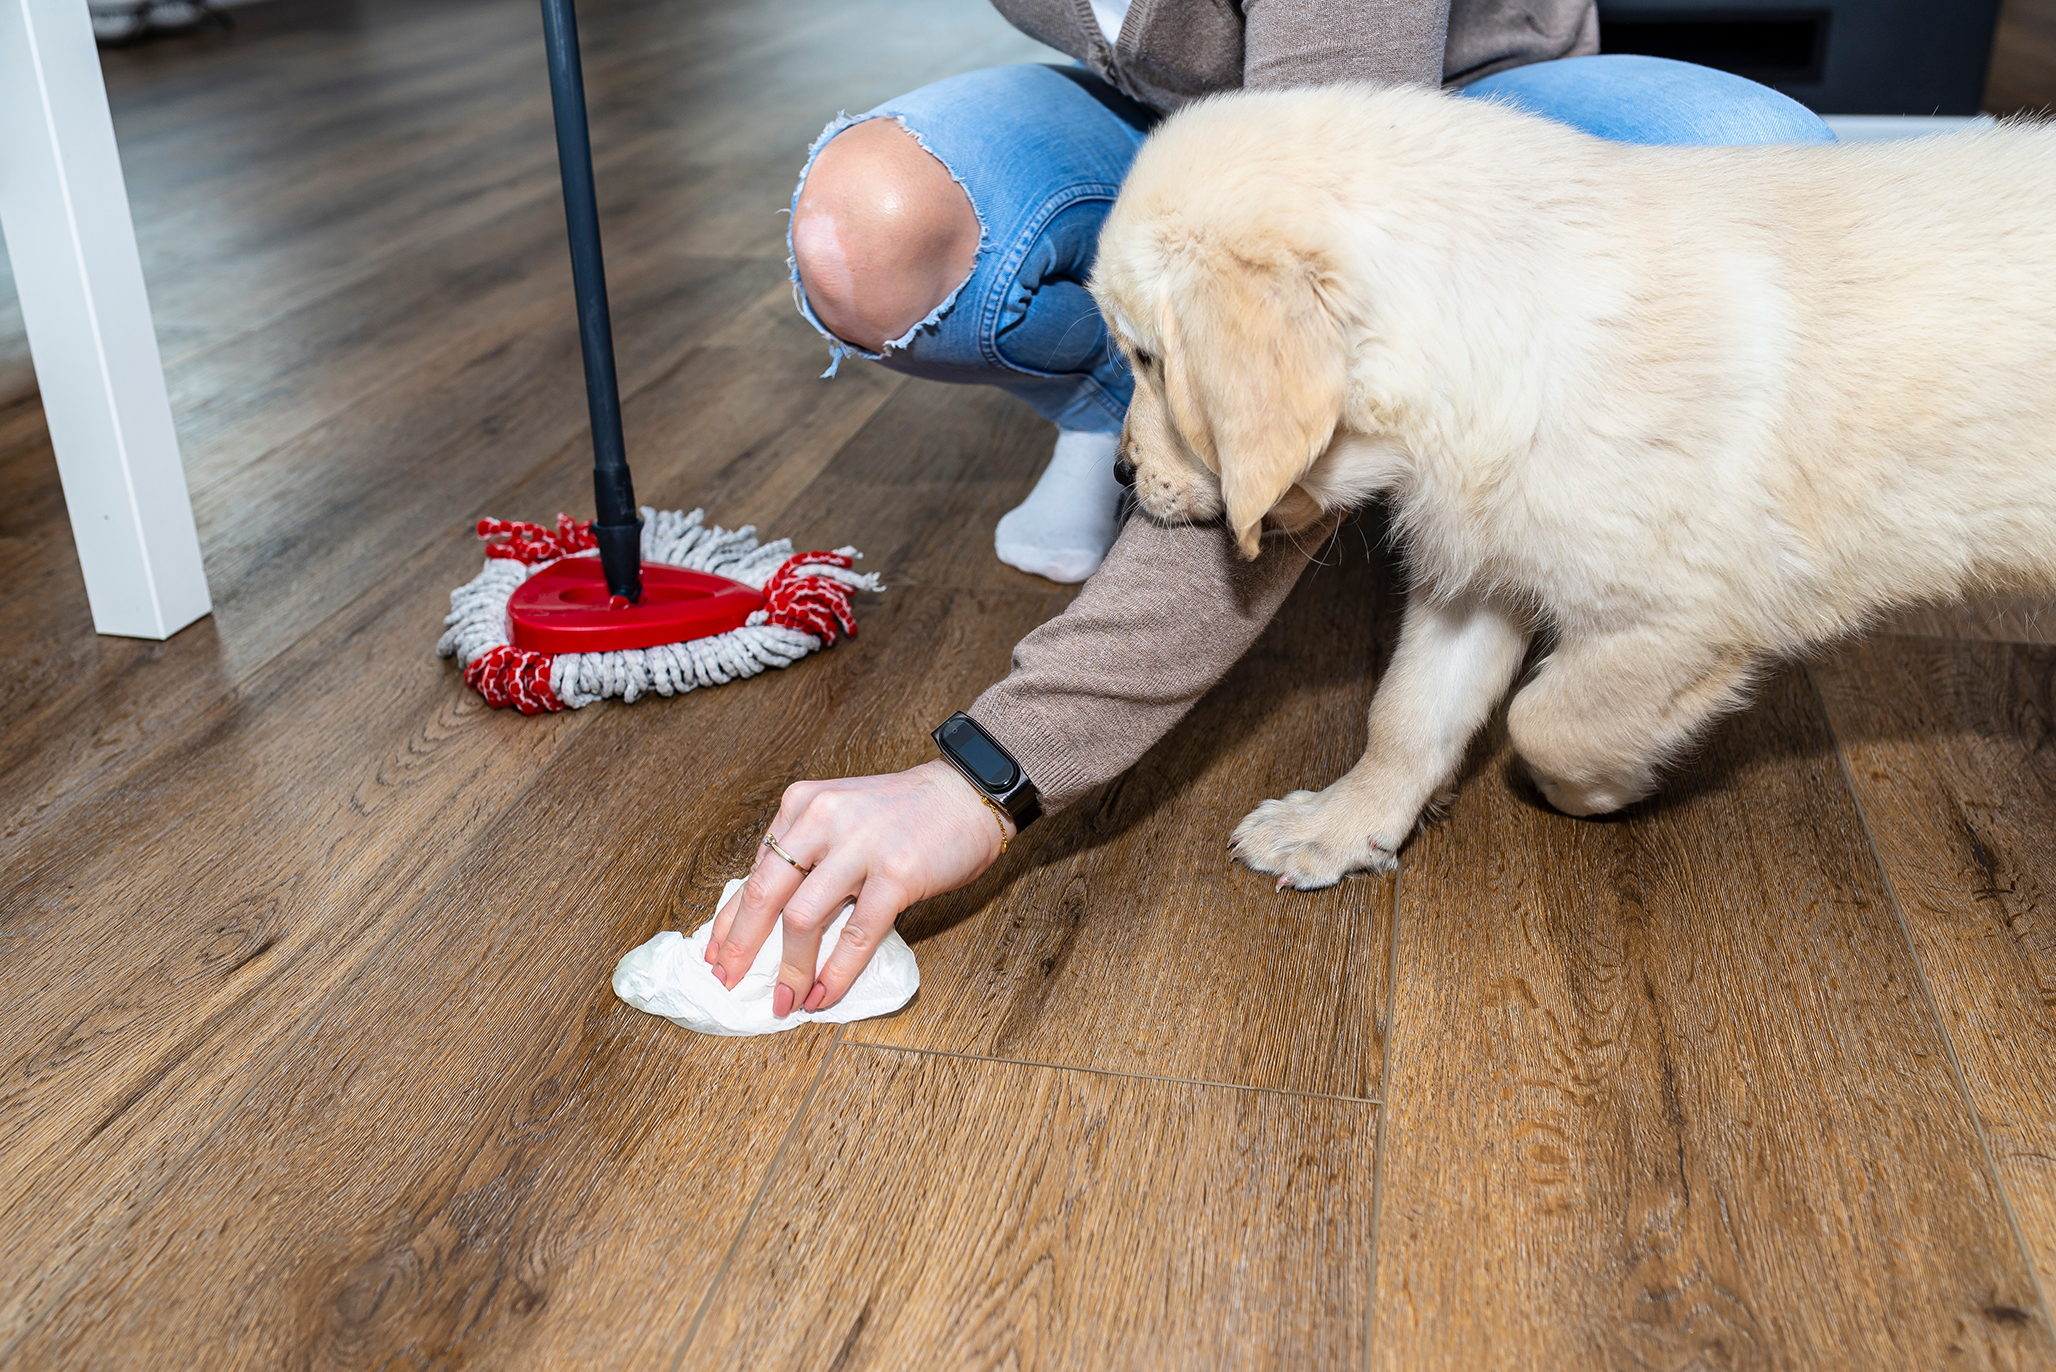 Woman cleaning up after puppy accident on vinyl floors.